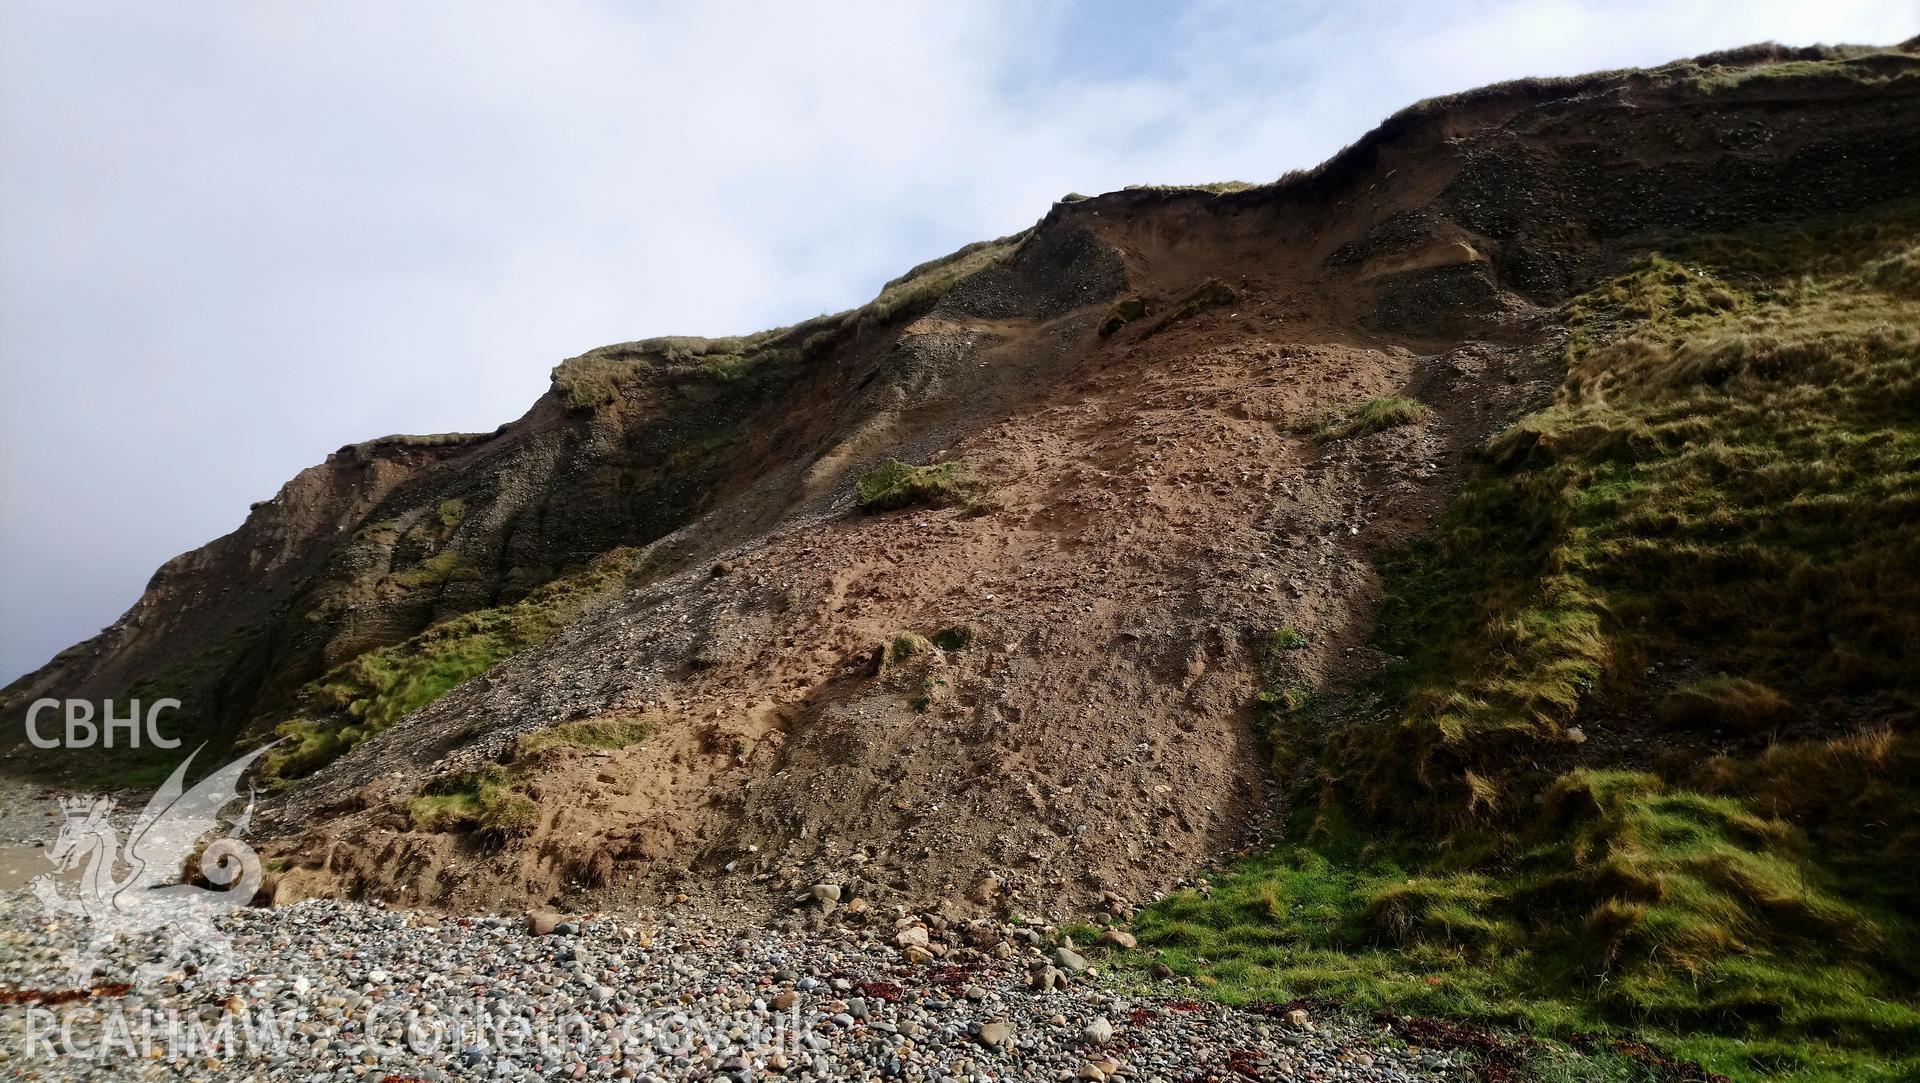 Eroding cliff face with patches of fallen turf. Camera facing NE. Taken by Toby Driver. Produced with EU funds through the Ireland Wales Co-operation Programme 2014-2023. All material made freely available through the Open Government Licence.